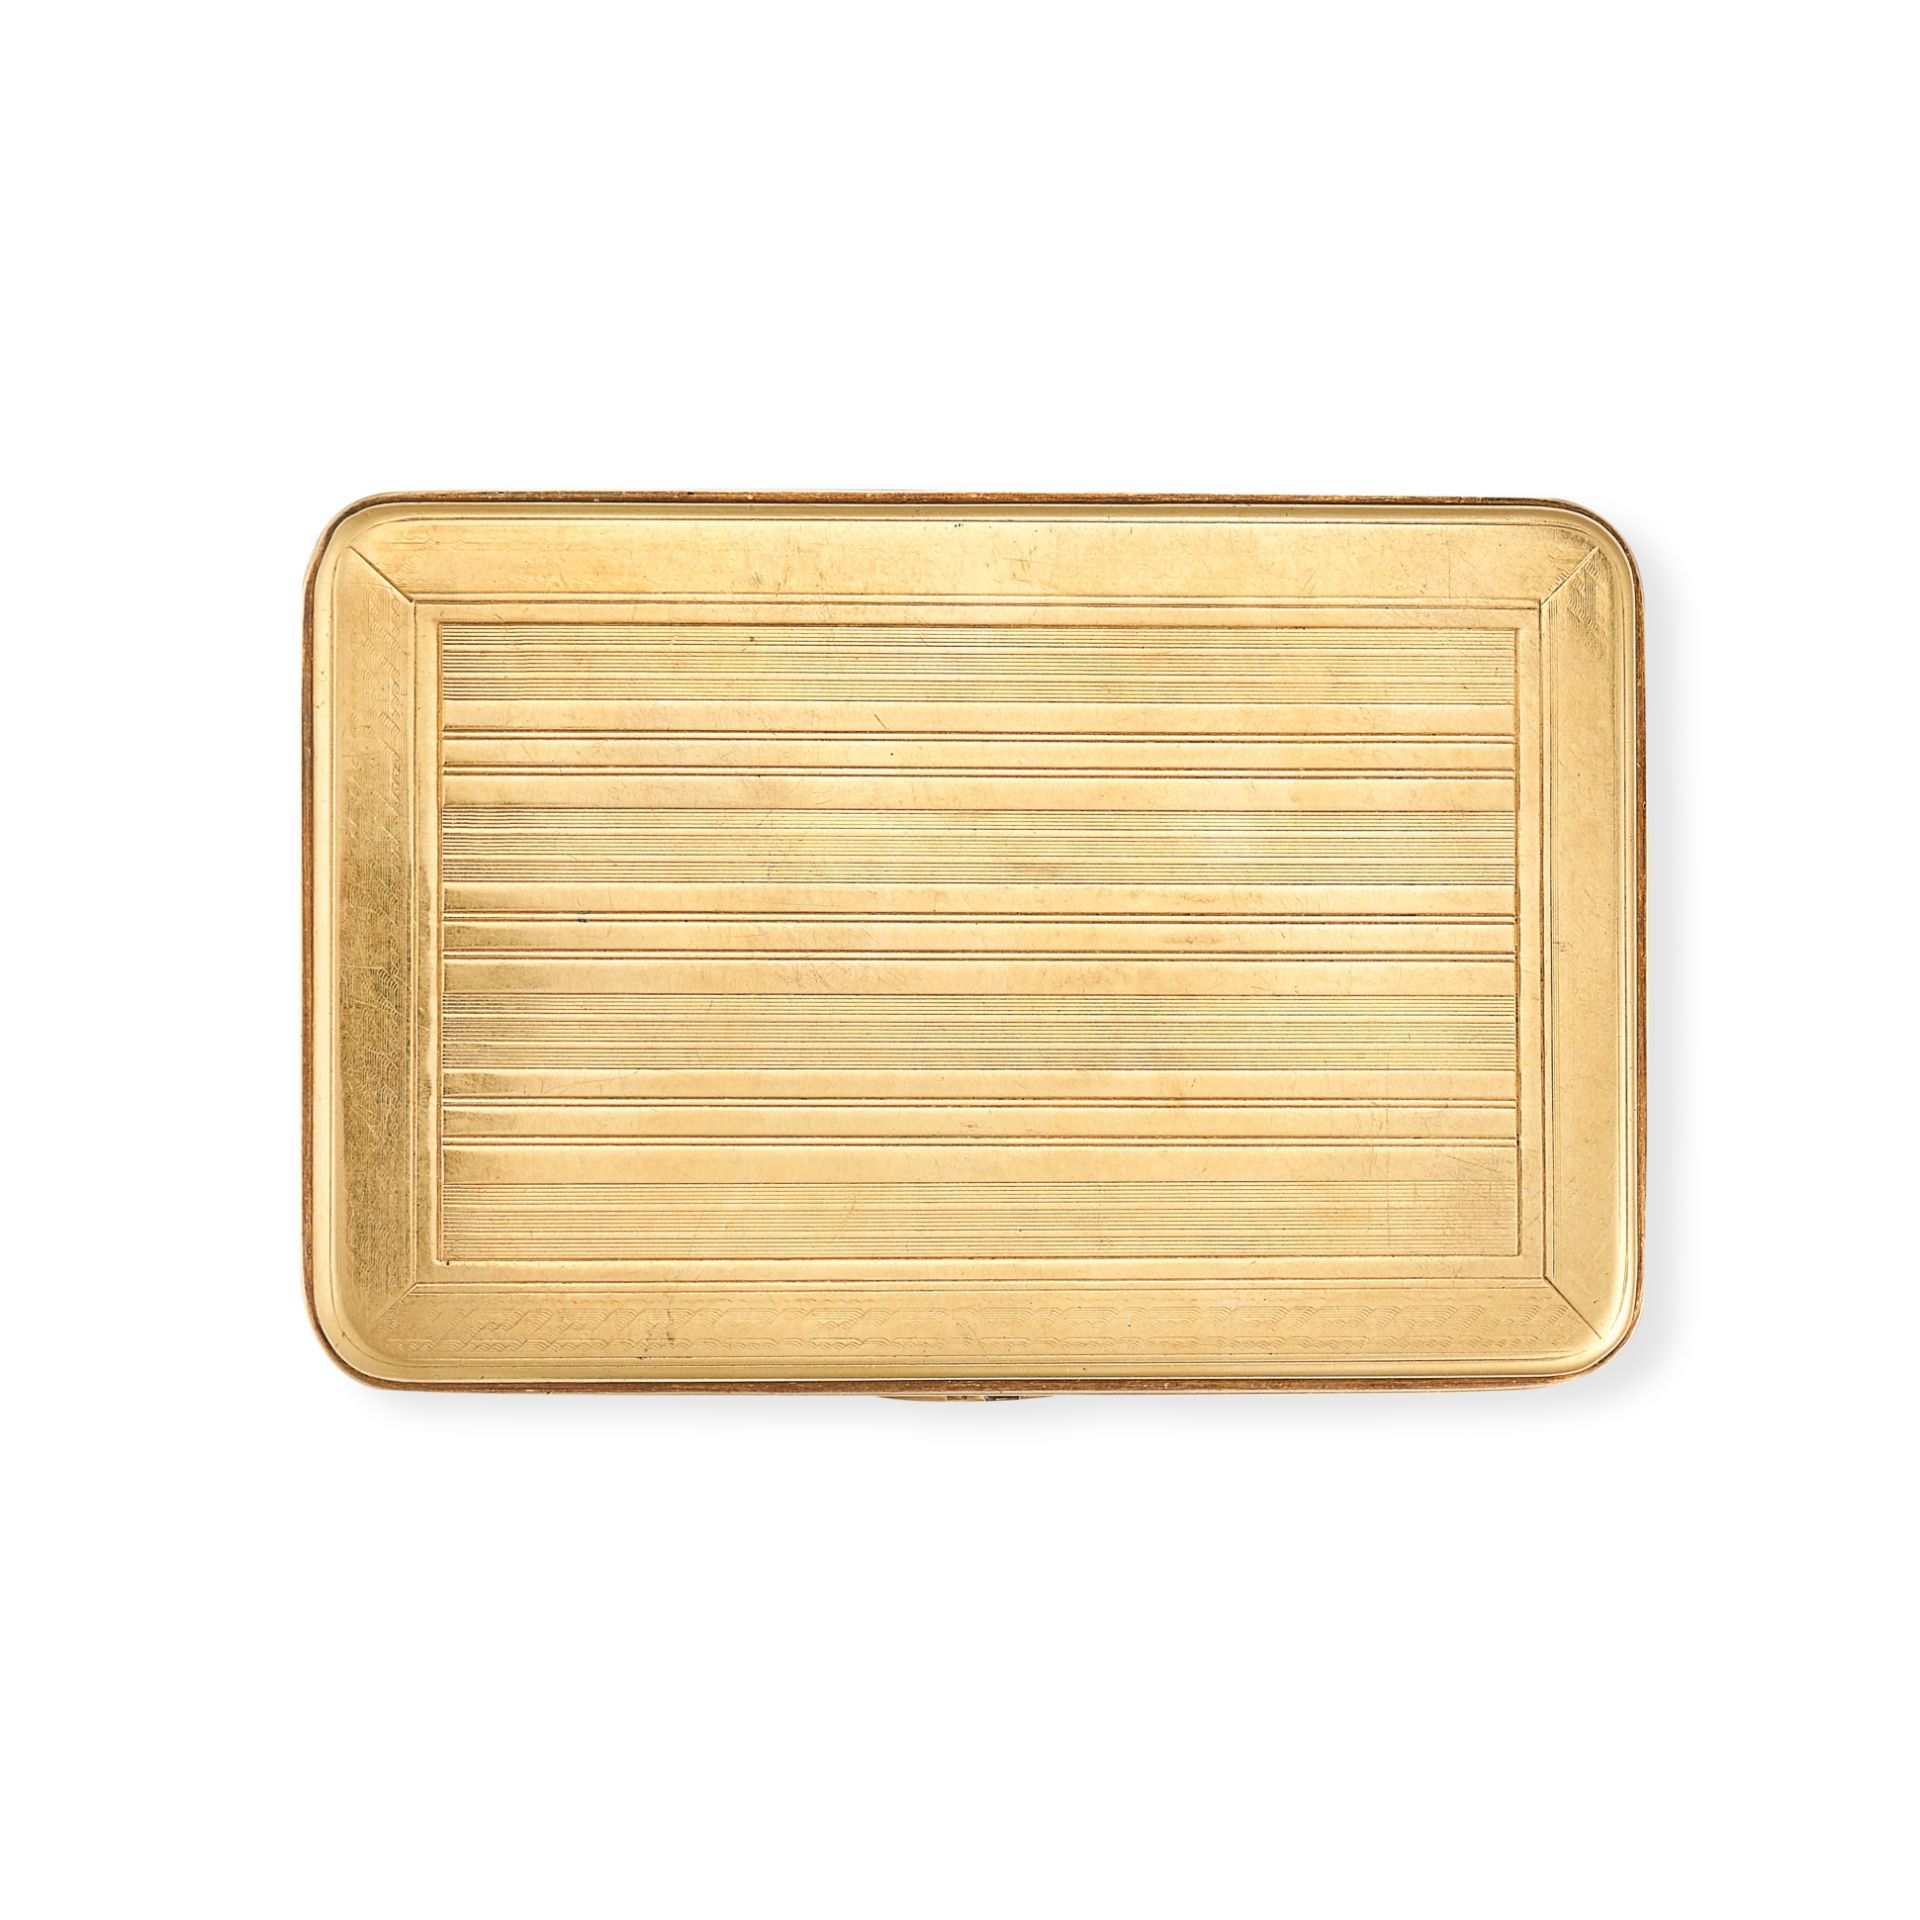 AN ANTIQUE FRENCH GOLD BOX in 18ct yellow gold, of rectangular form with engine turned detailing,